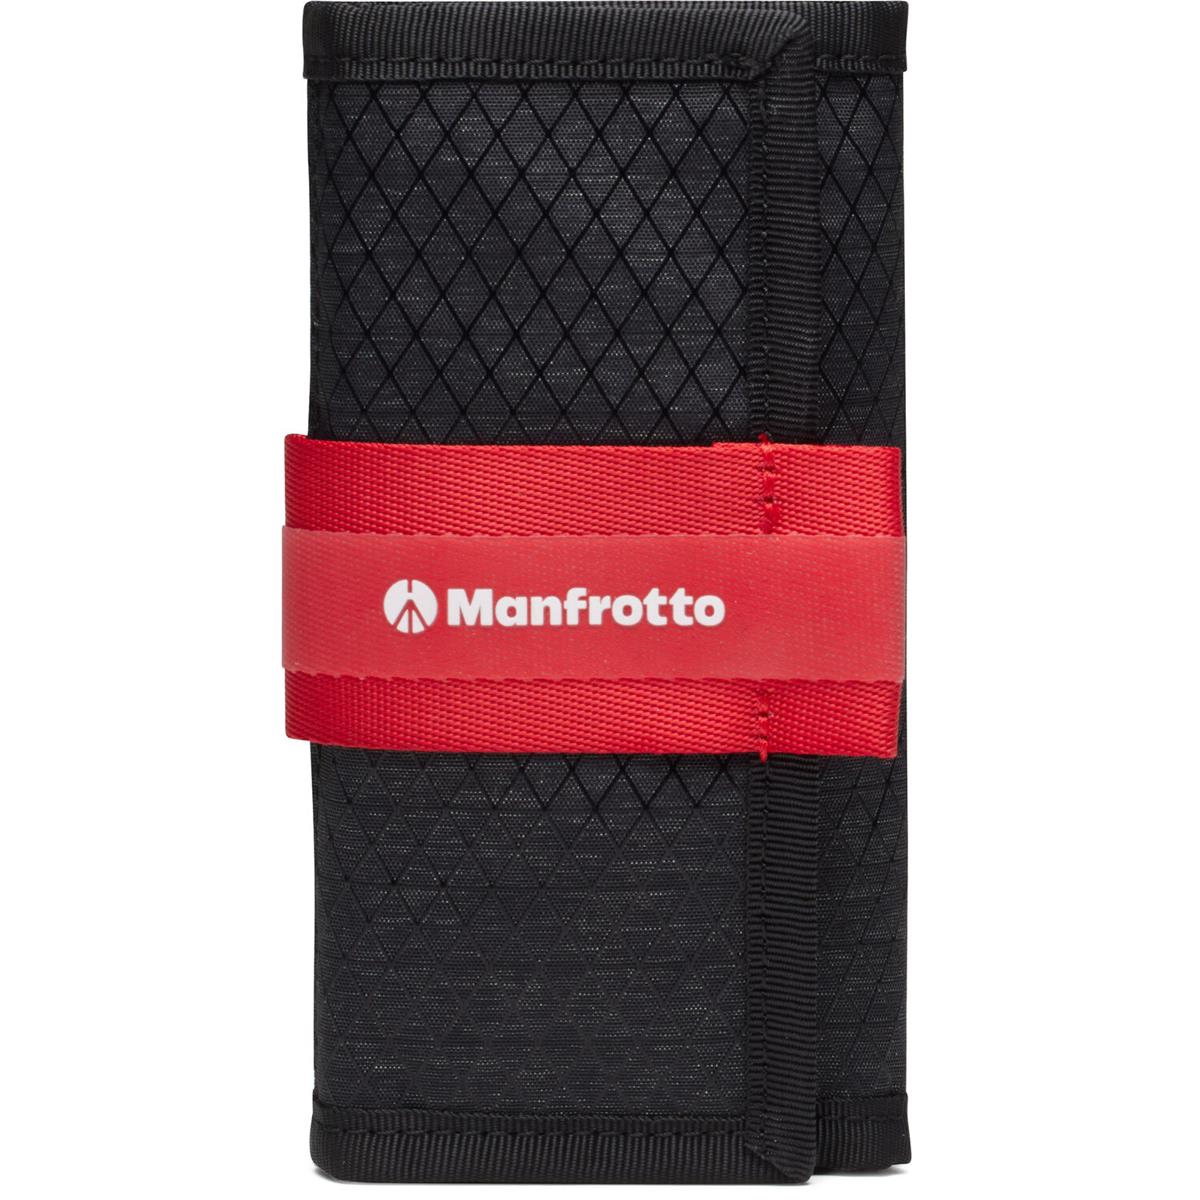 Image of Manfrotto Pro Light Card Holder